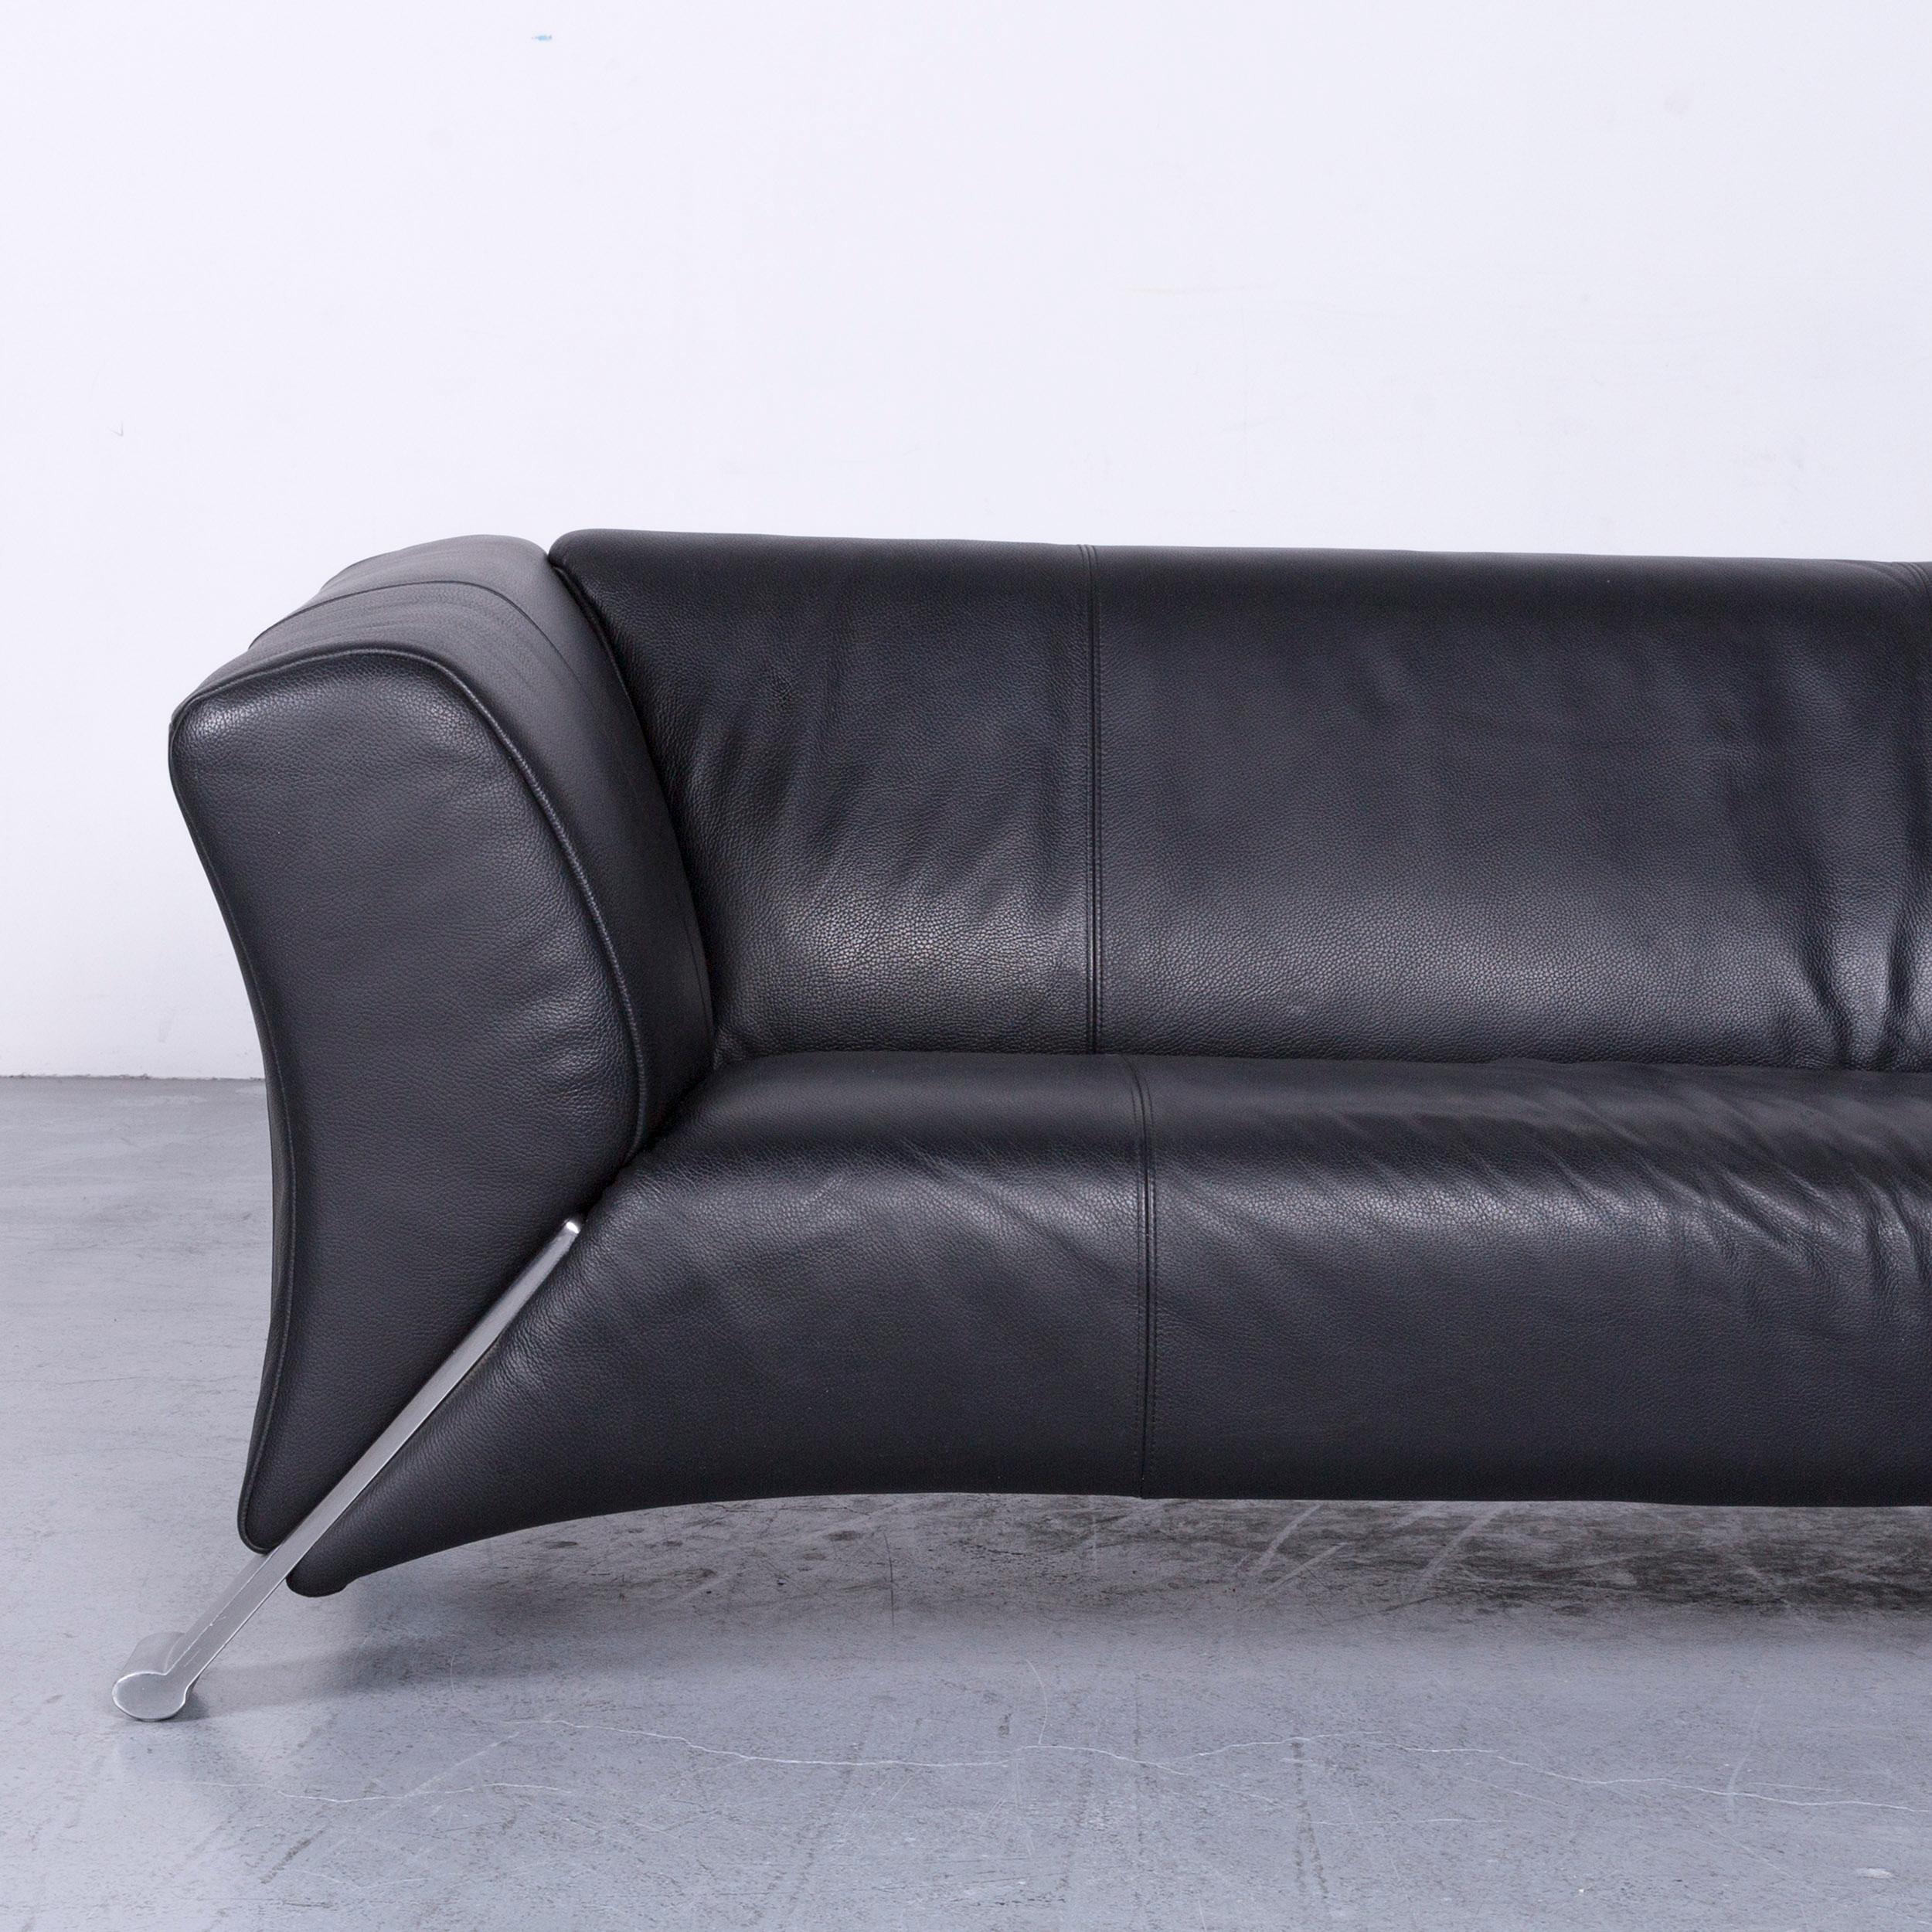 Modern Rolf Benz 322 Designer Sofa Black Two-Seat Leather Couch